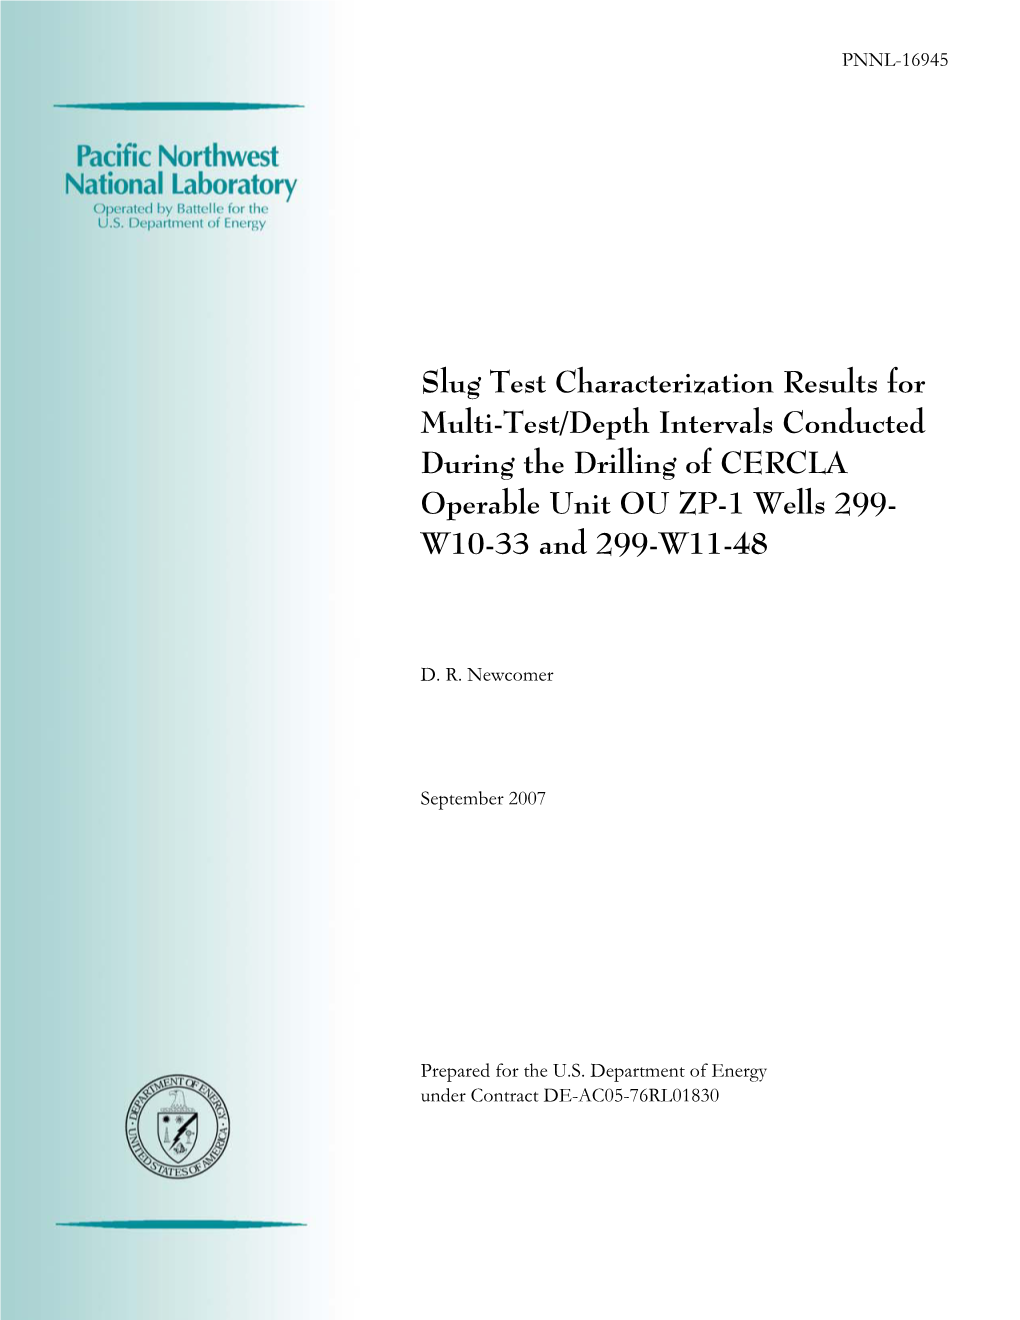 Slug Test Characterization Results for Multi-Test/Depth Intervals Conducted During the Drilling of CERCLA Operable Unit OU ZP-1 Wells 299- W10-33 and 299-W11-48